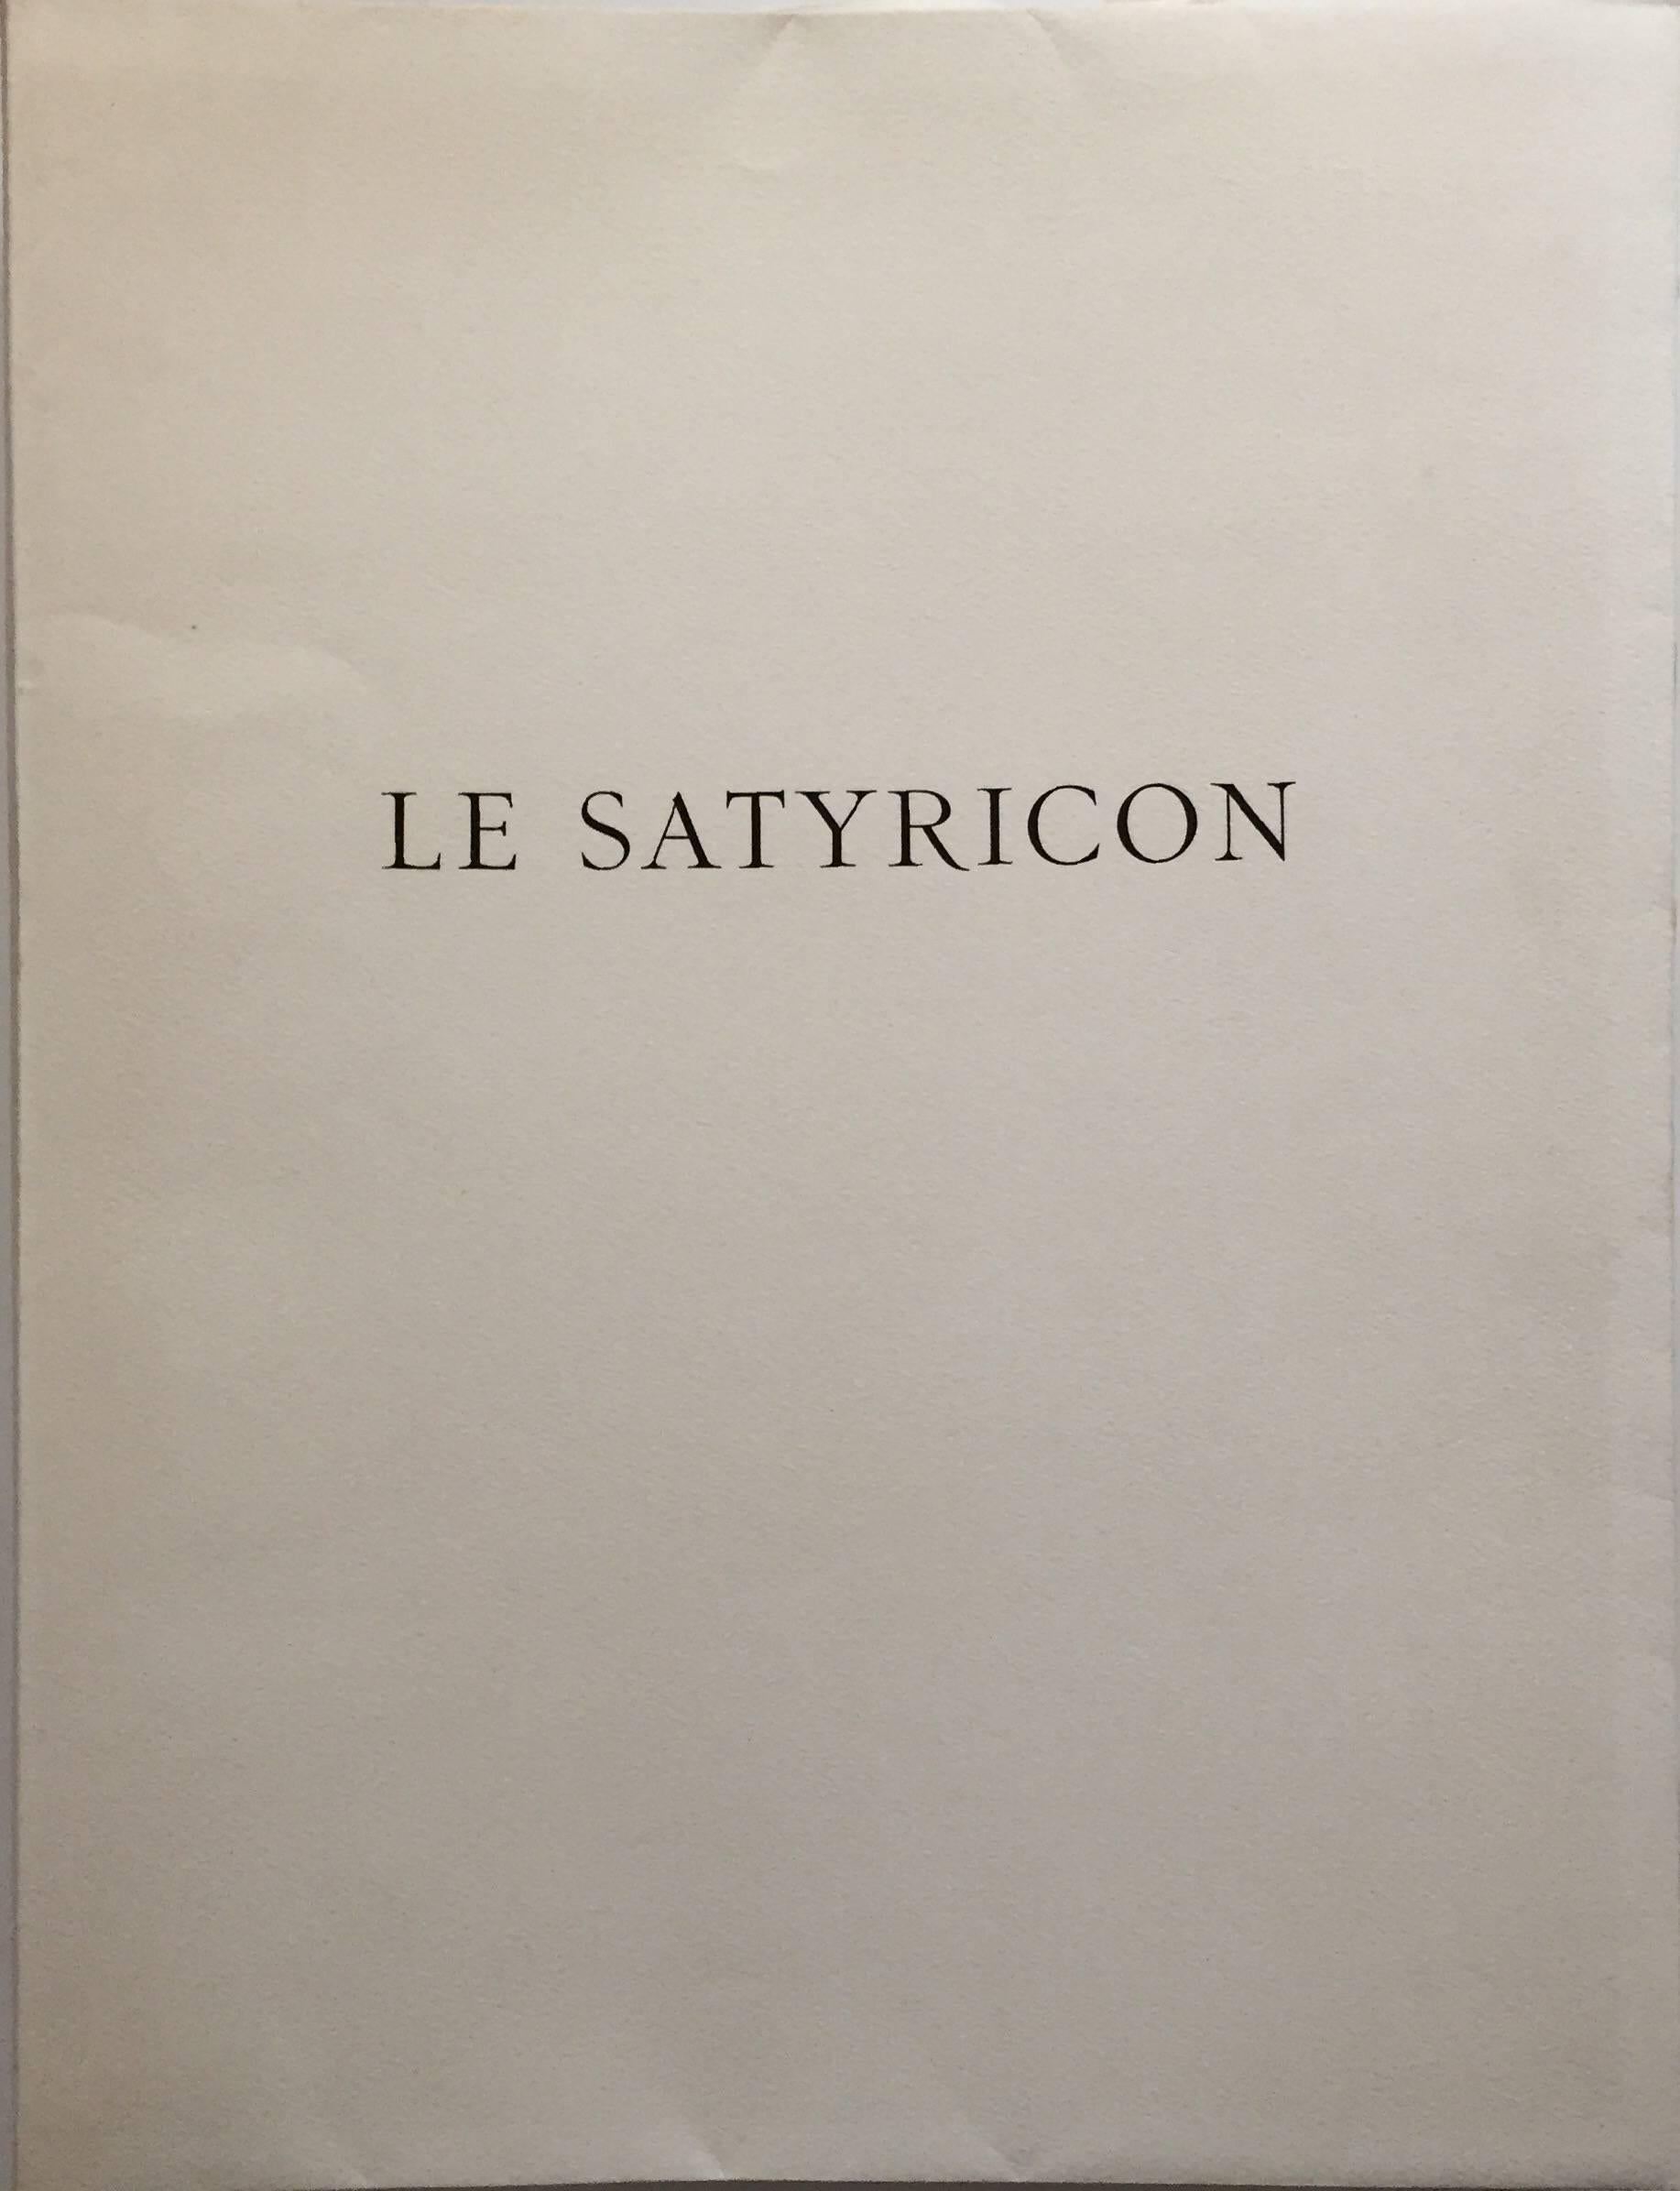 Etching from Le Satyricon  - Gray Figurative Print by André Derain